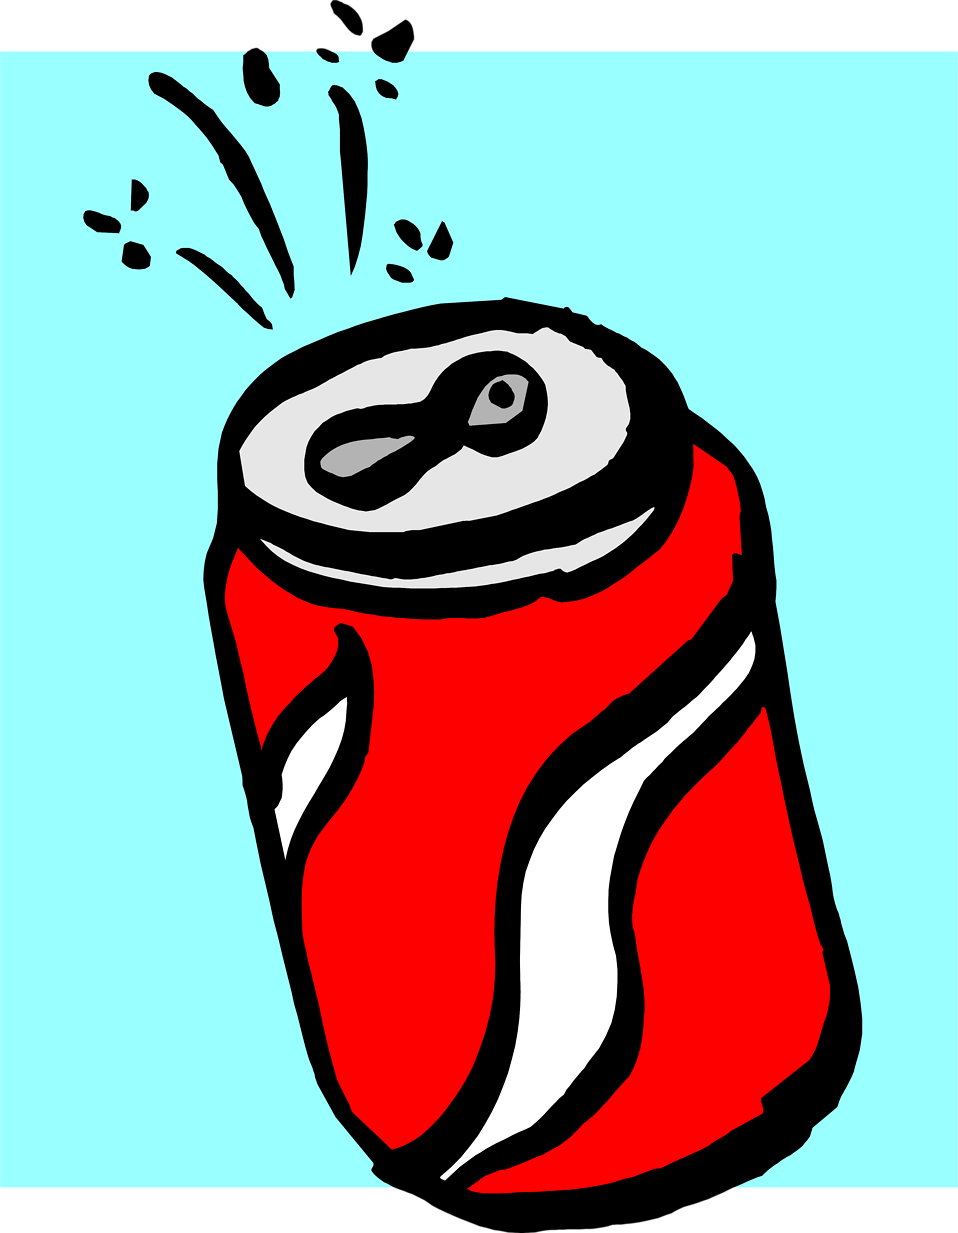 Soda | Free Stock Photo | Illustration of a can of soda | # 5125